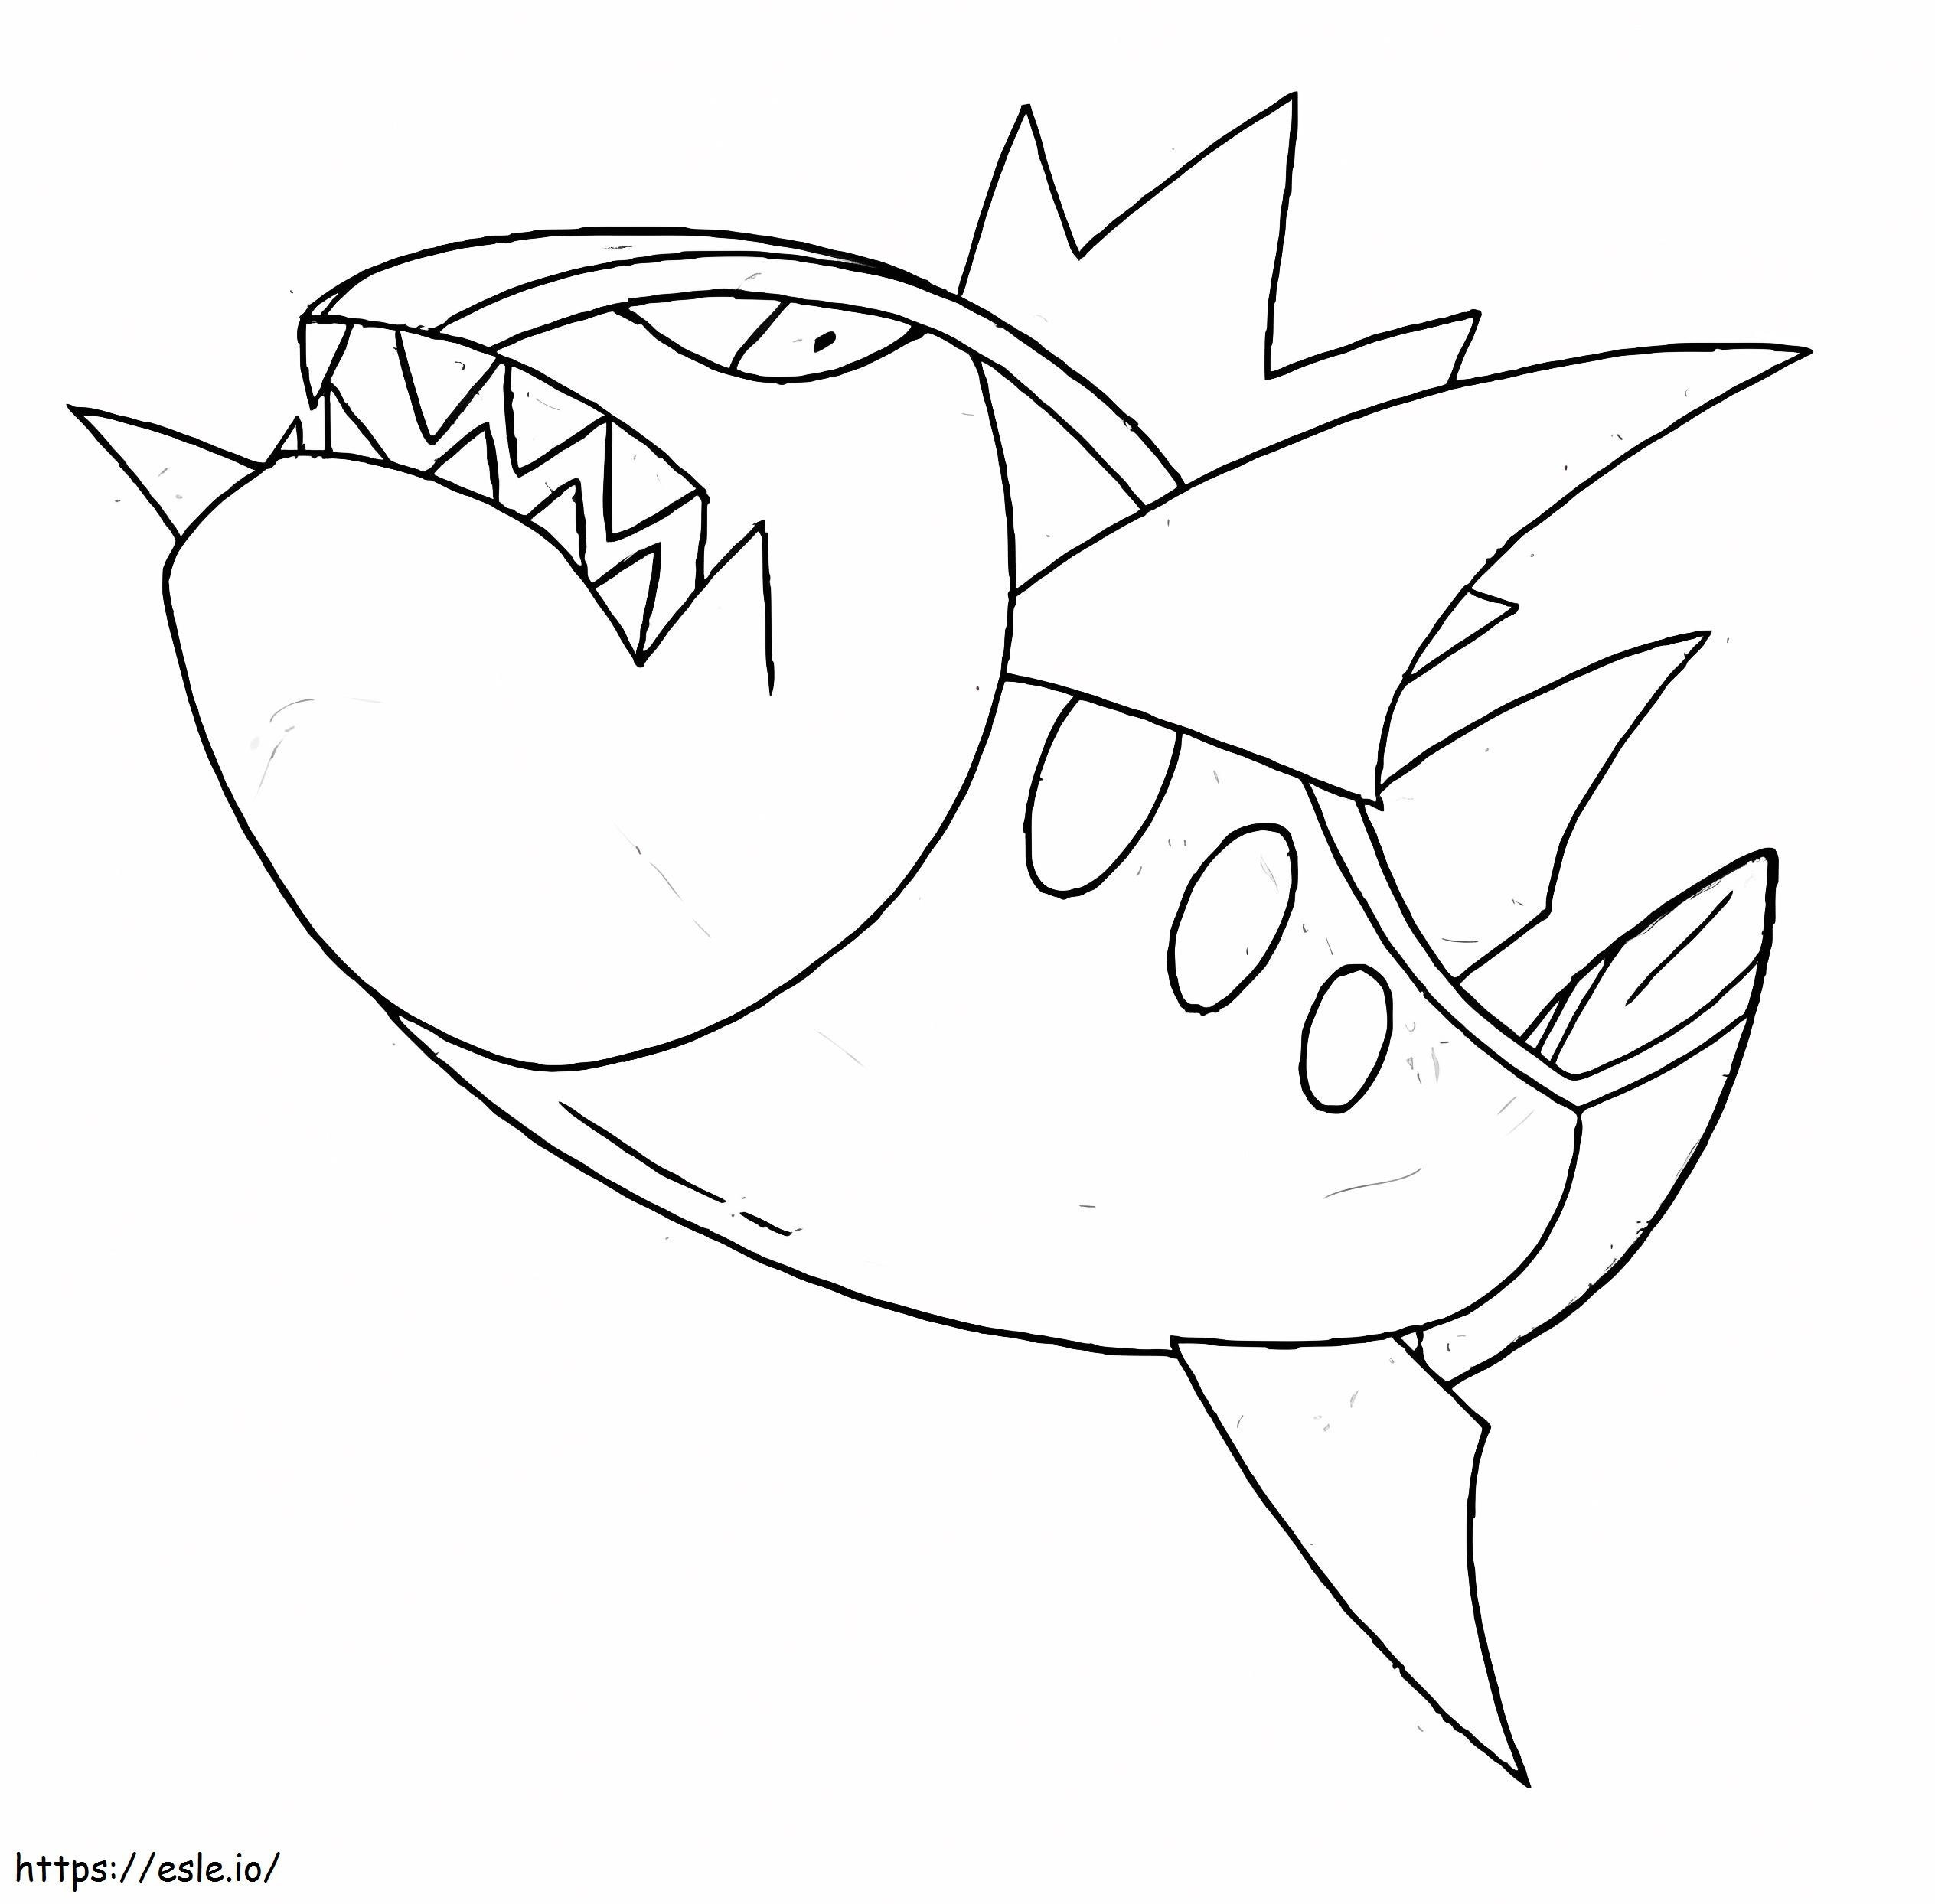 Basculin Pokemon 1 coloring page